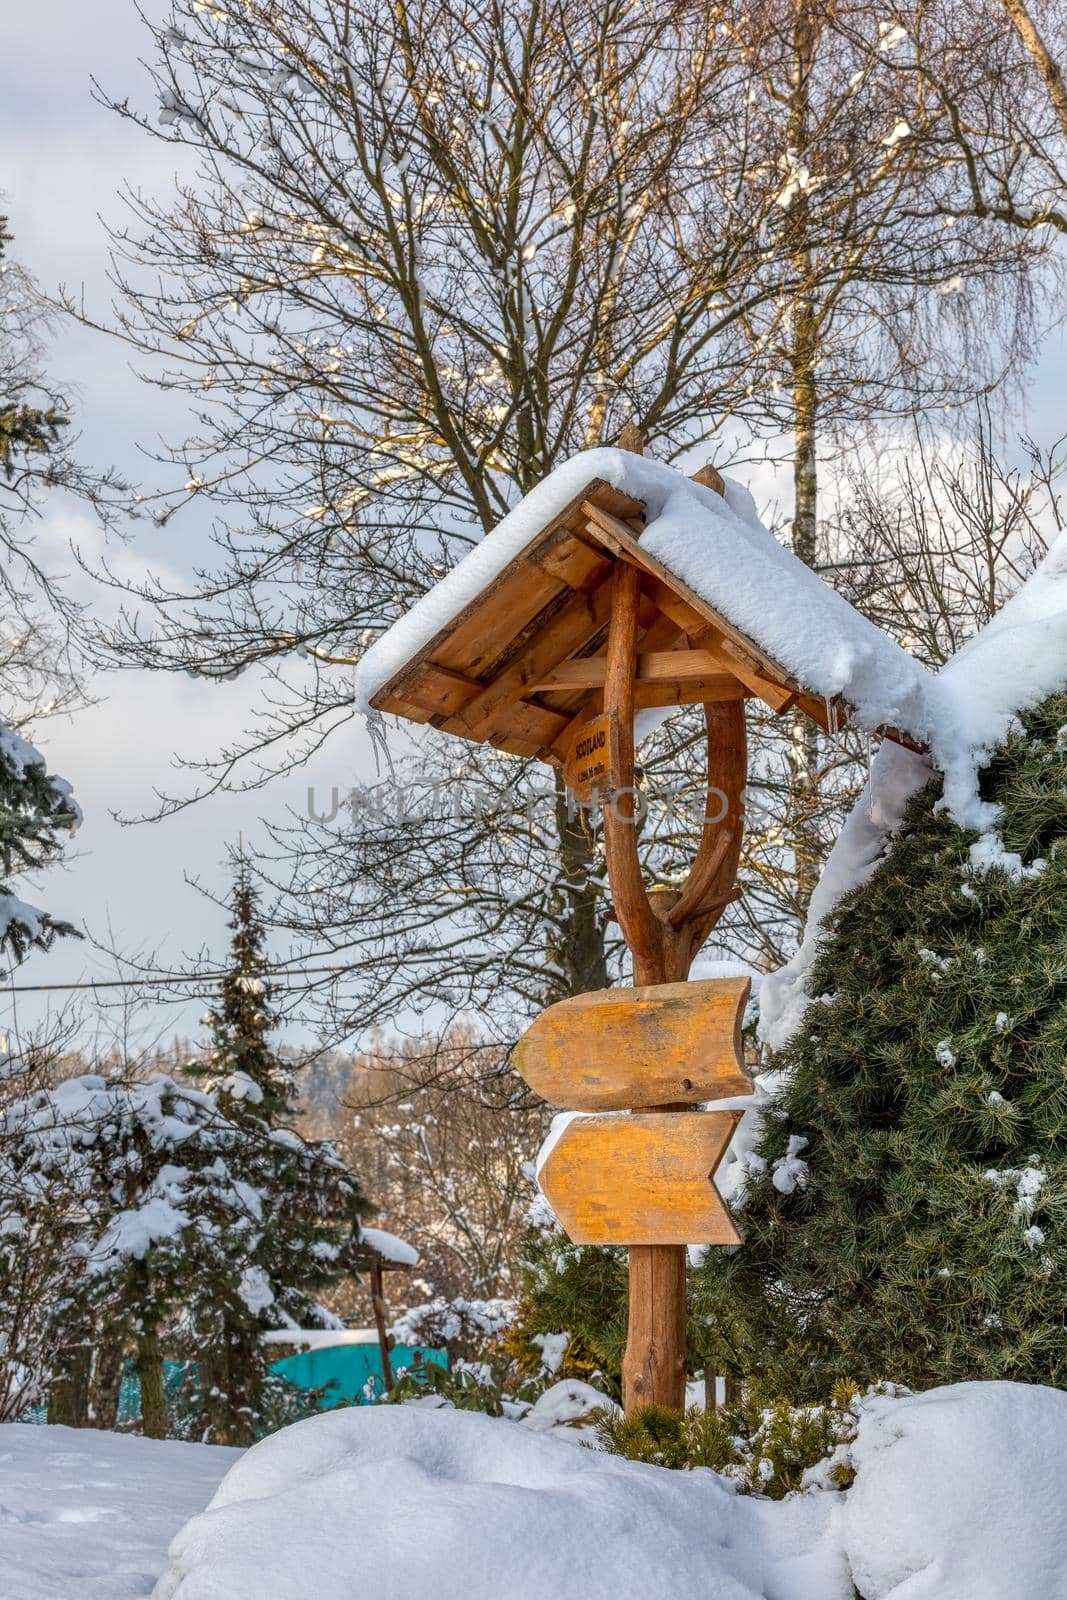 beautiful wooden signpost in winter garden covered with fresh snow